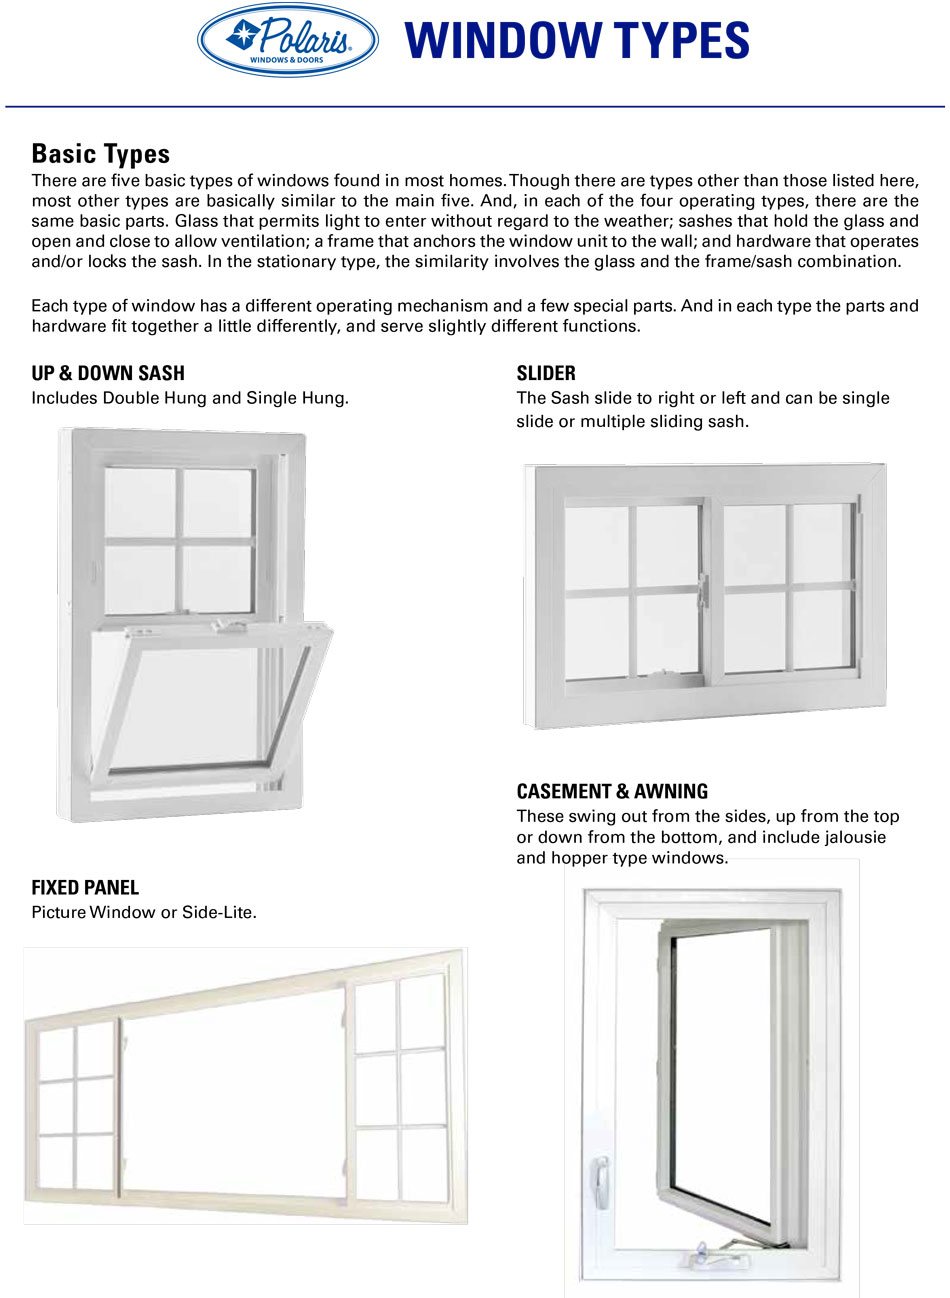 Polaris Window Types Up and Down Sash, Slider, Fixed Panel, Casement and awning